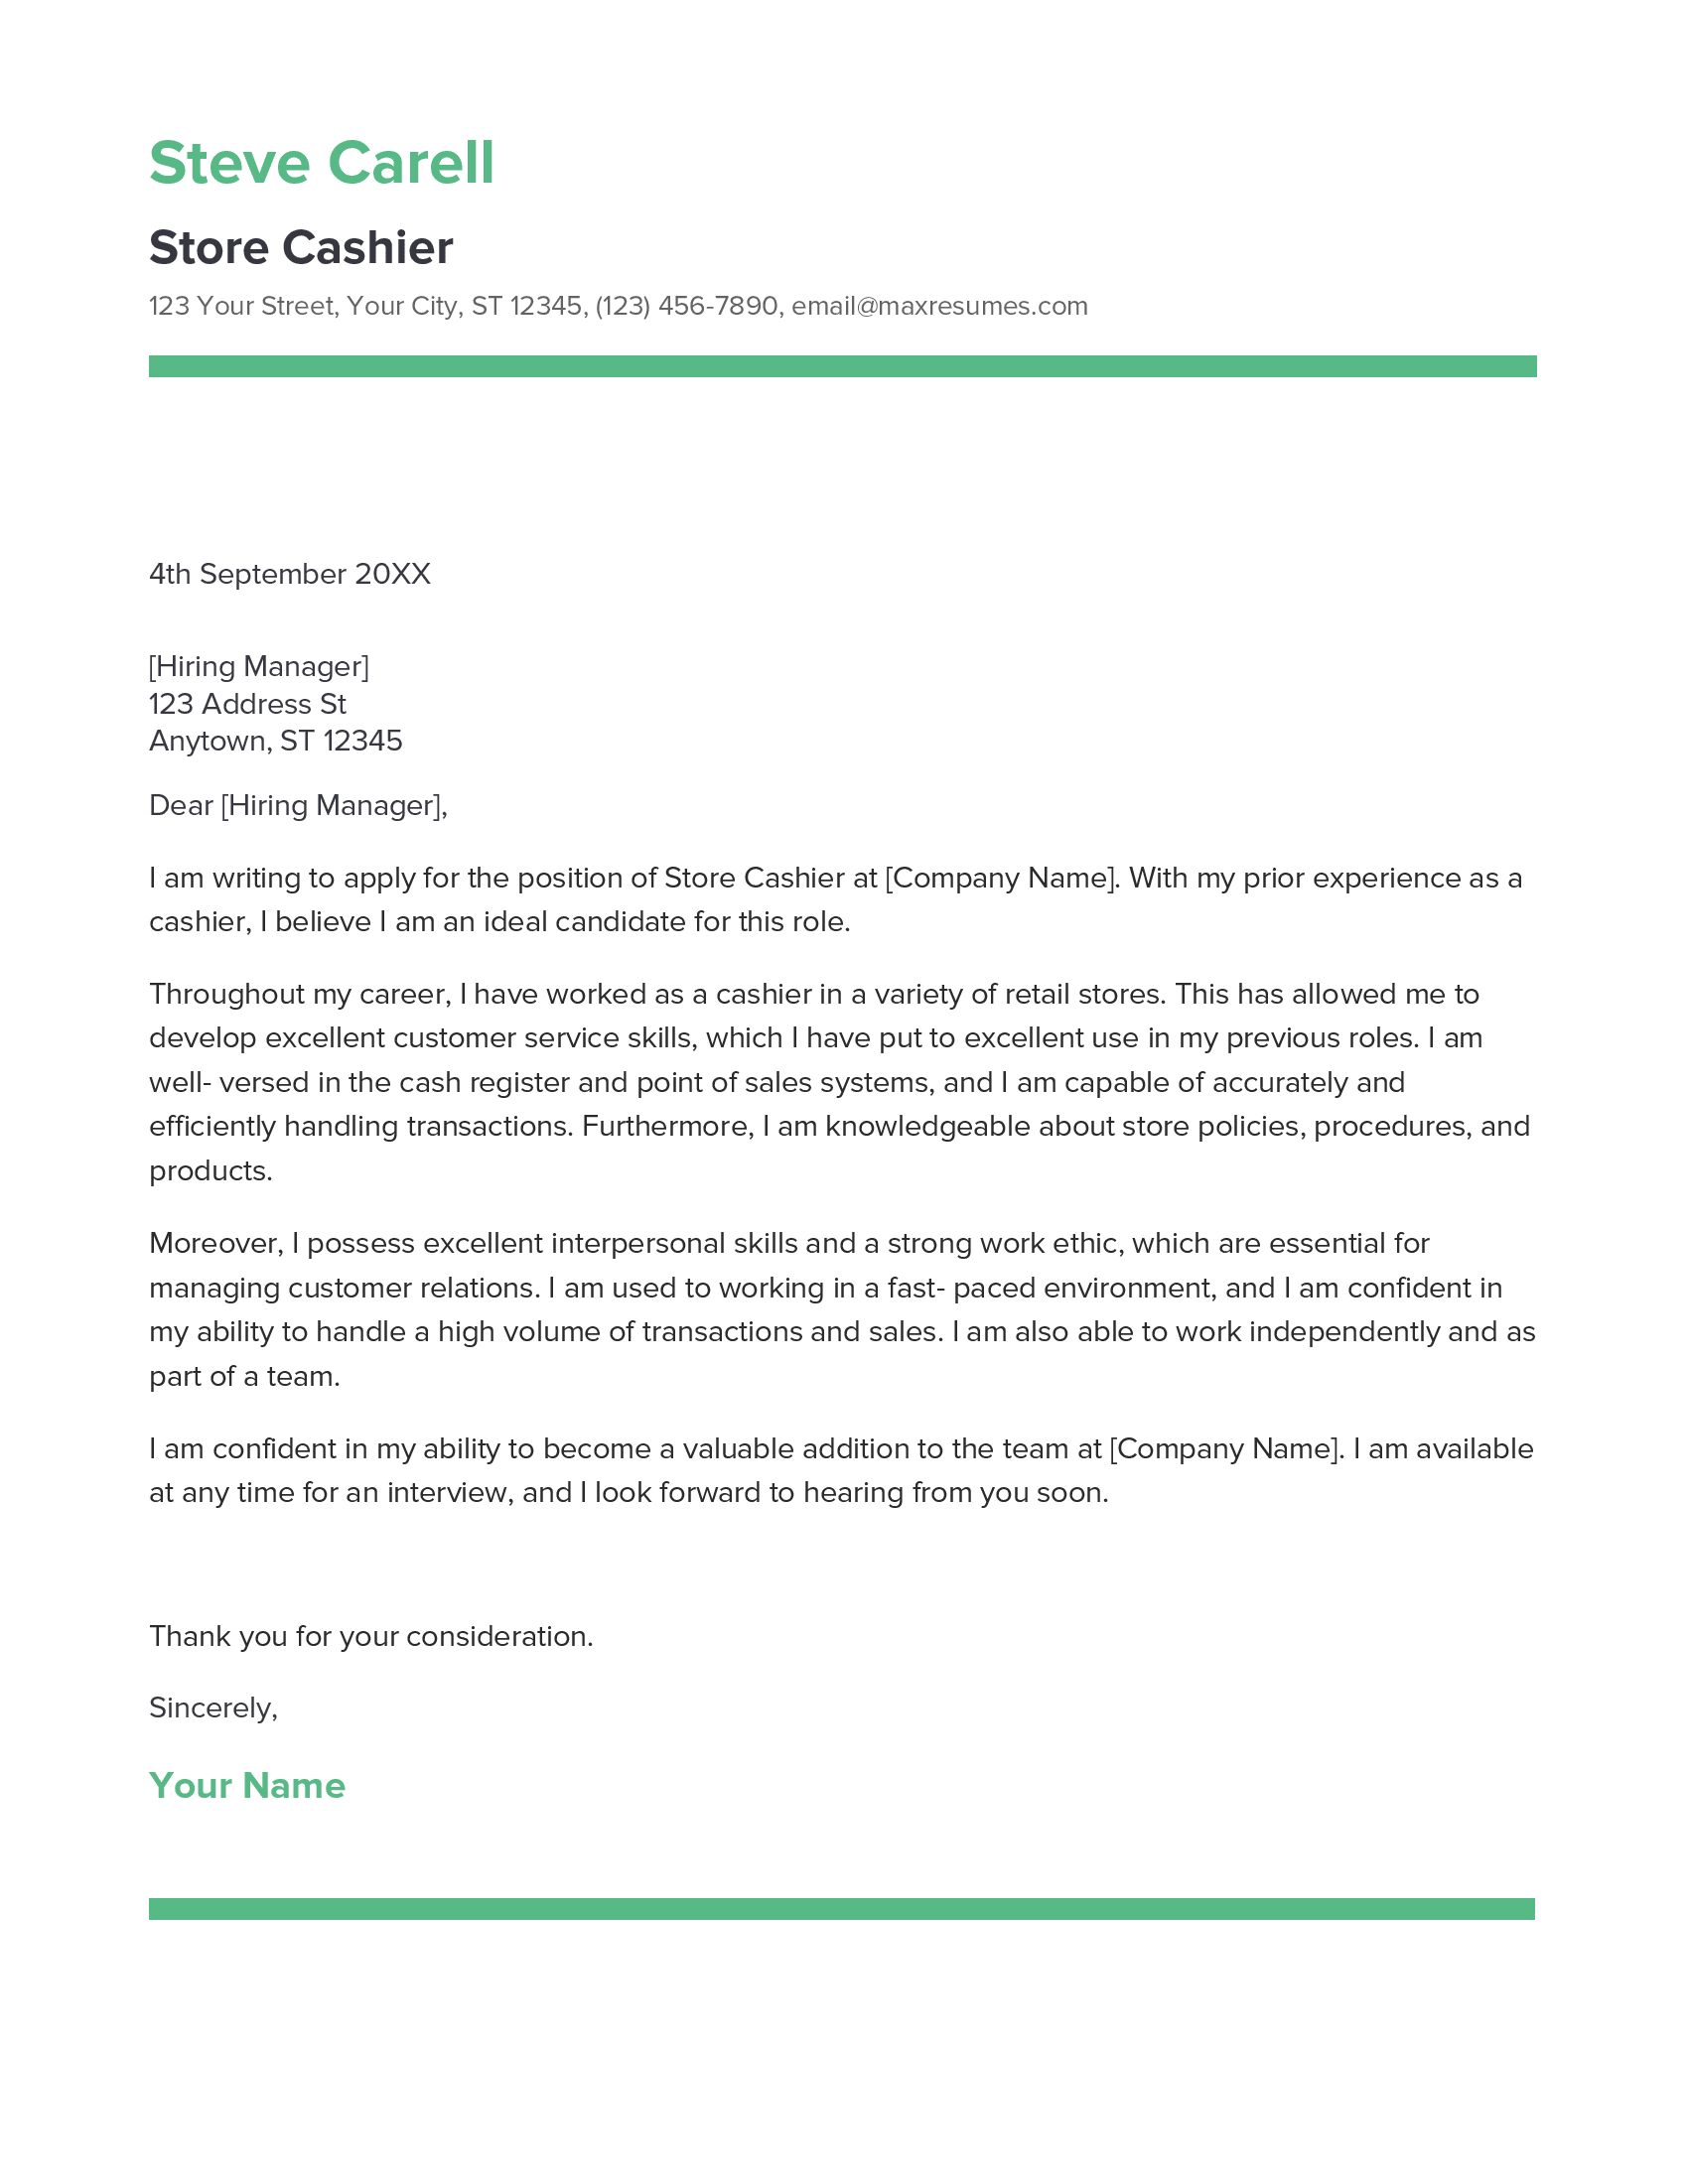 Store Cashier Cover Letter Example